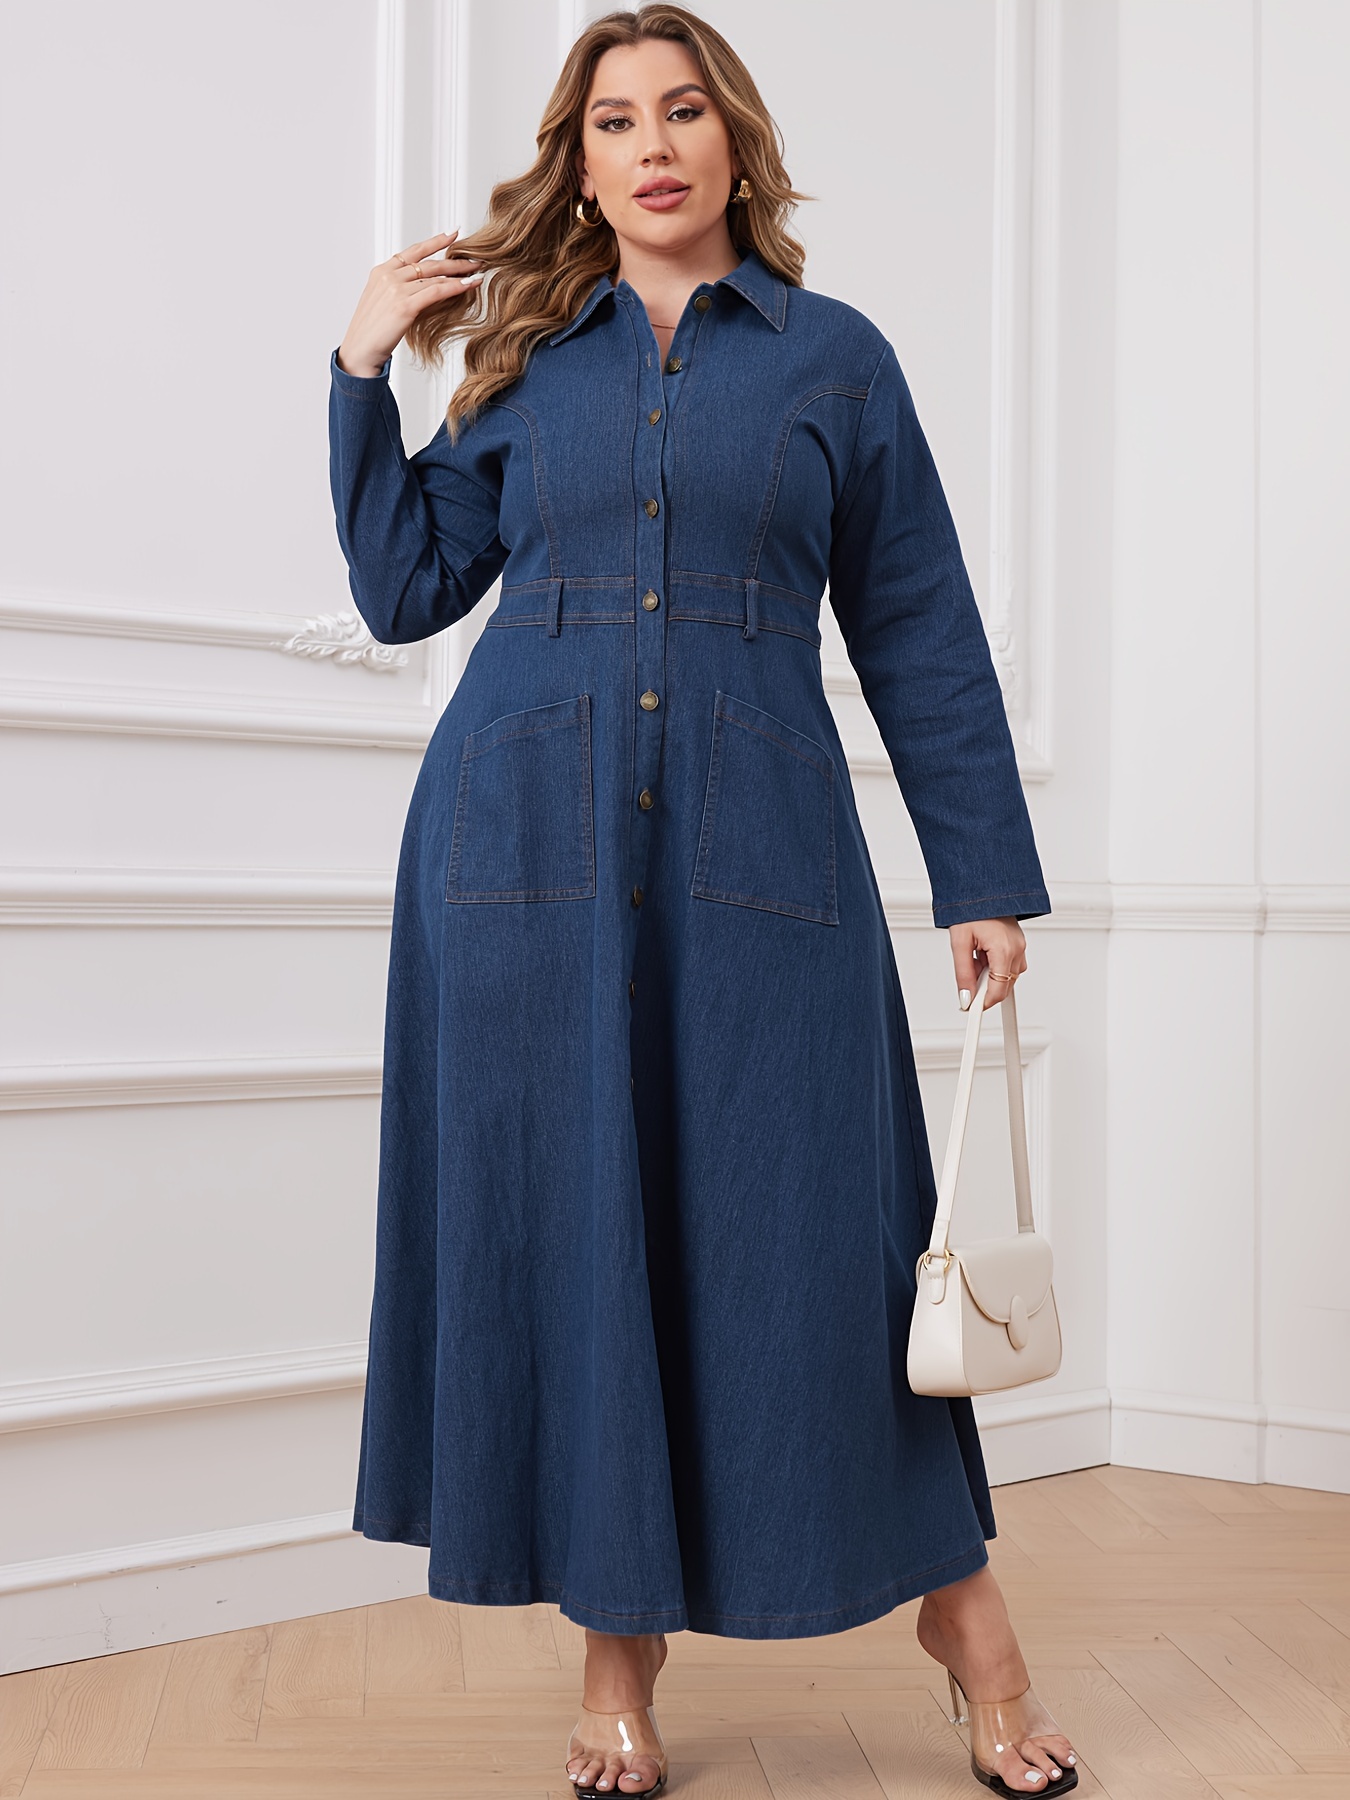 2021 Womens Summer Denim Maxi Dress With Button Bootstrap 5 Up Pocket, Blue  Print, Short Sleeves, Plus Size Option, Casual And Long Vestidos 5XL Q0712  From Yanqin03, $12.53